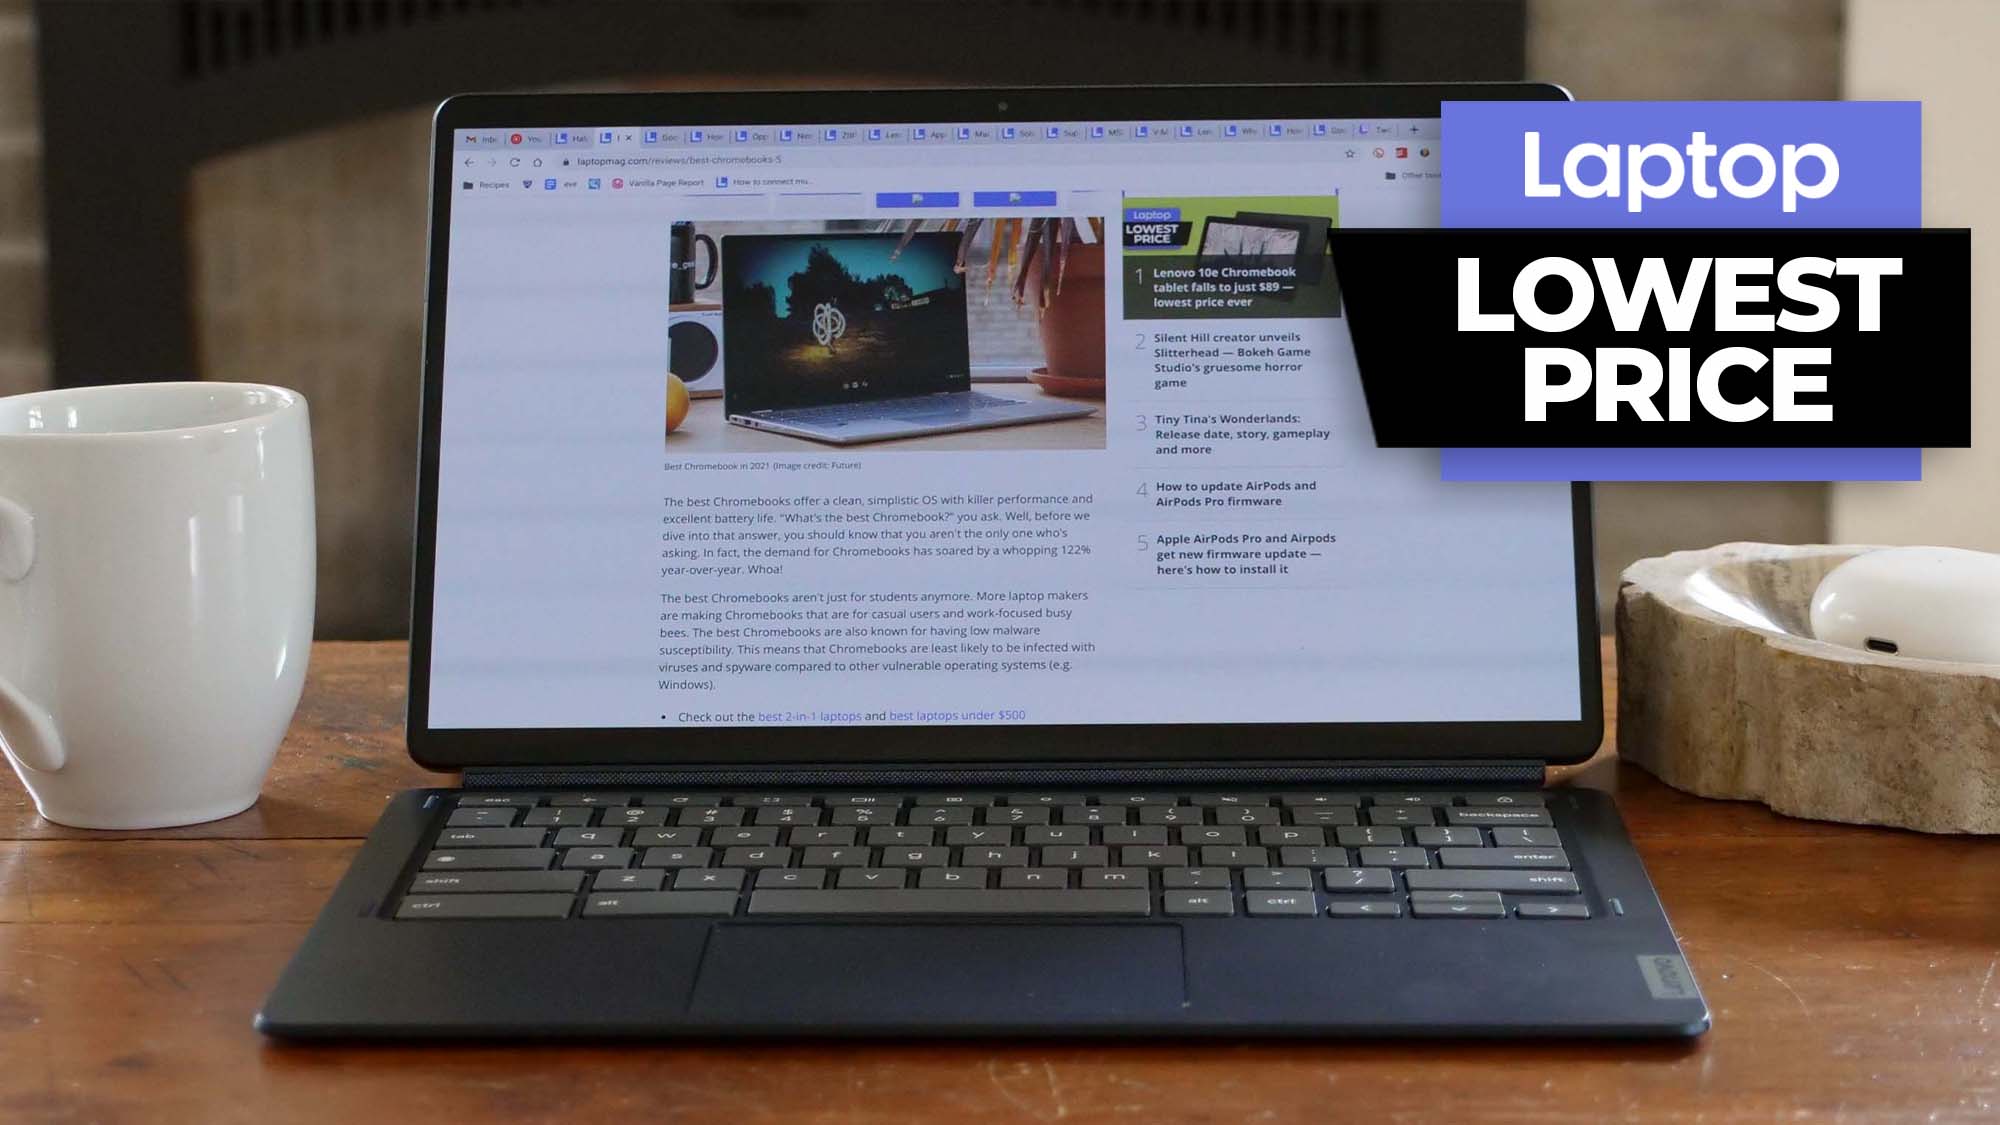 Lenovo IdeaPad Duet 5 Chromebook on coffee table with open screen showing LaptopMag.com and lowest price ad covered on photo